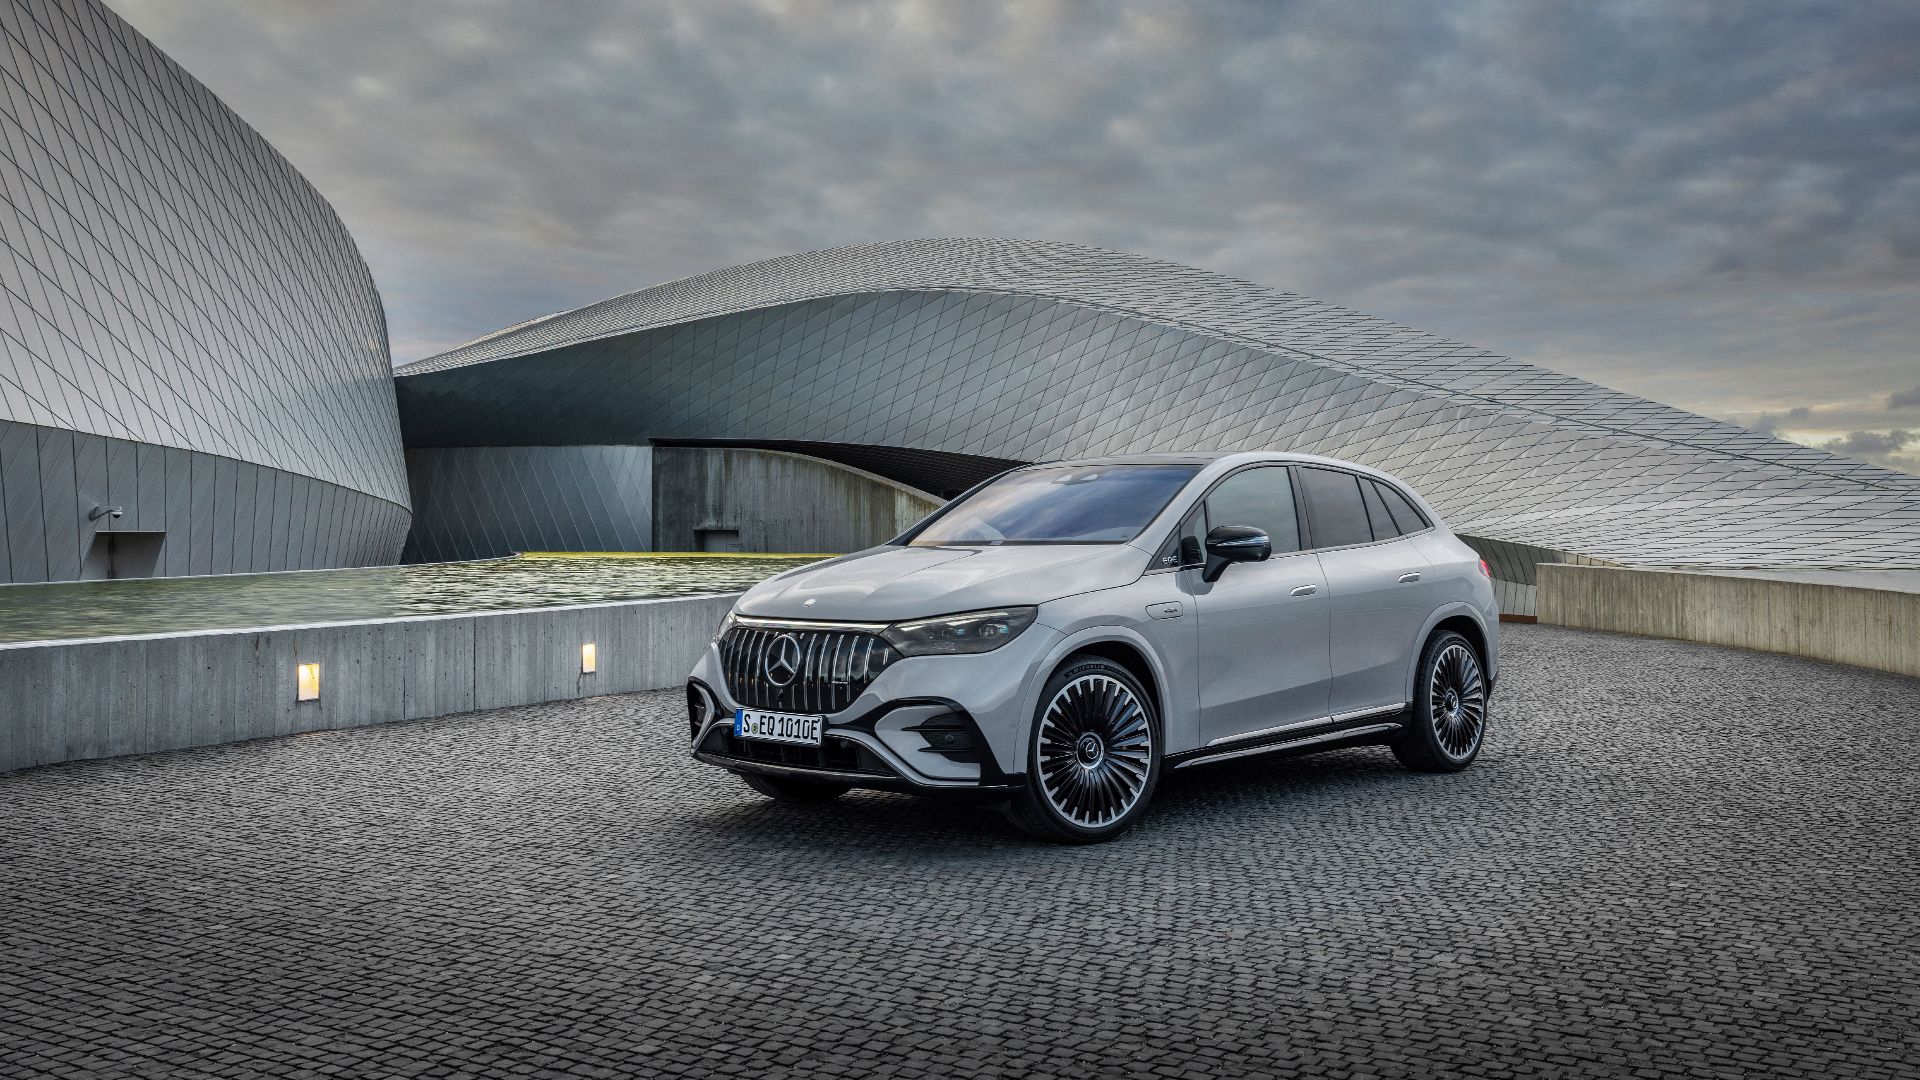 10 Reasons How The Mercedes EQE SUV Is Setting The Bar For Luxury SUVs